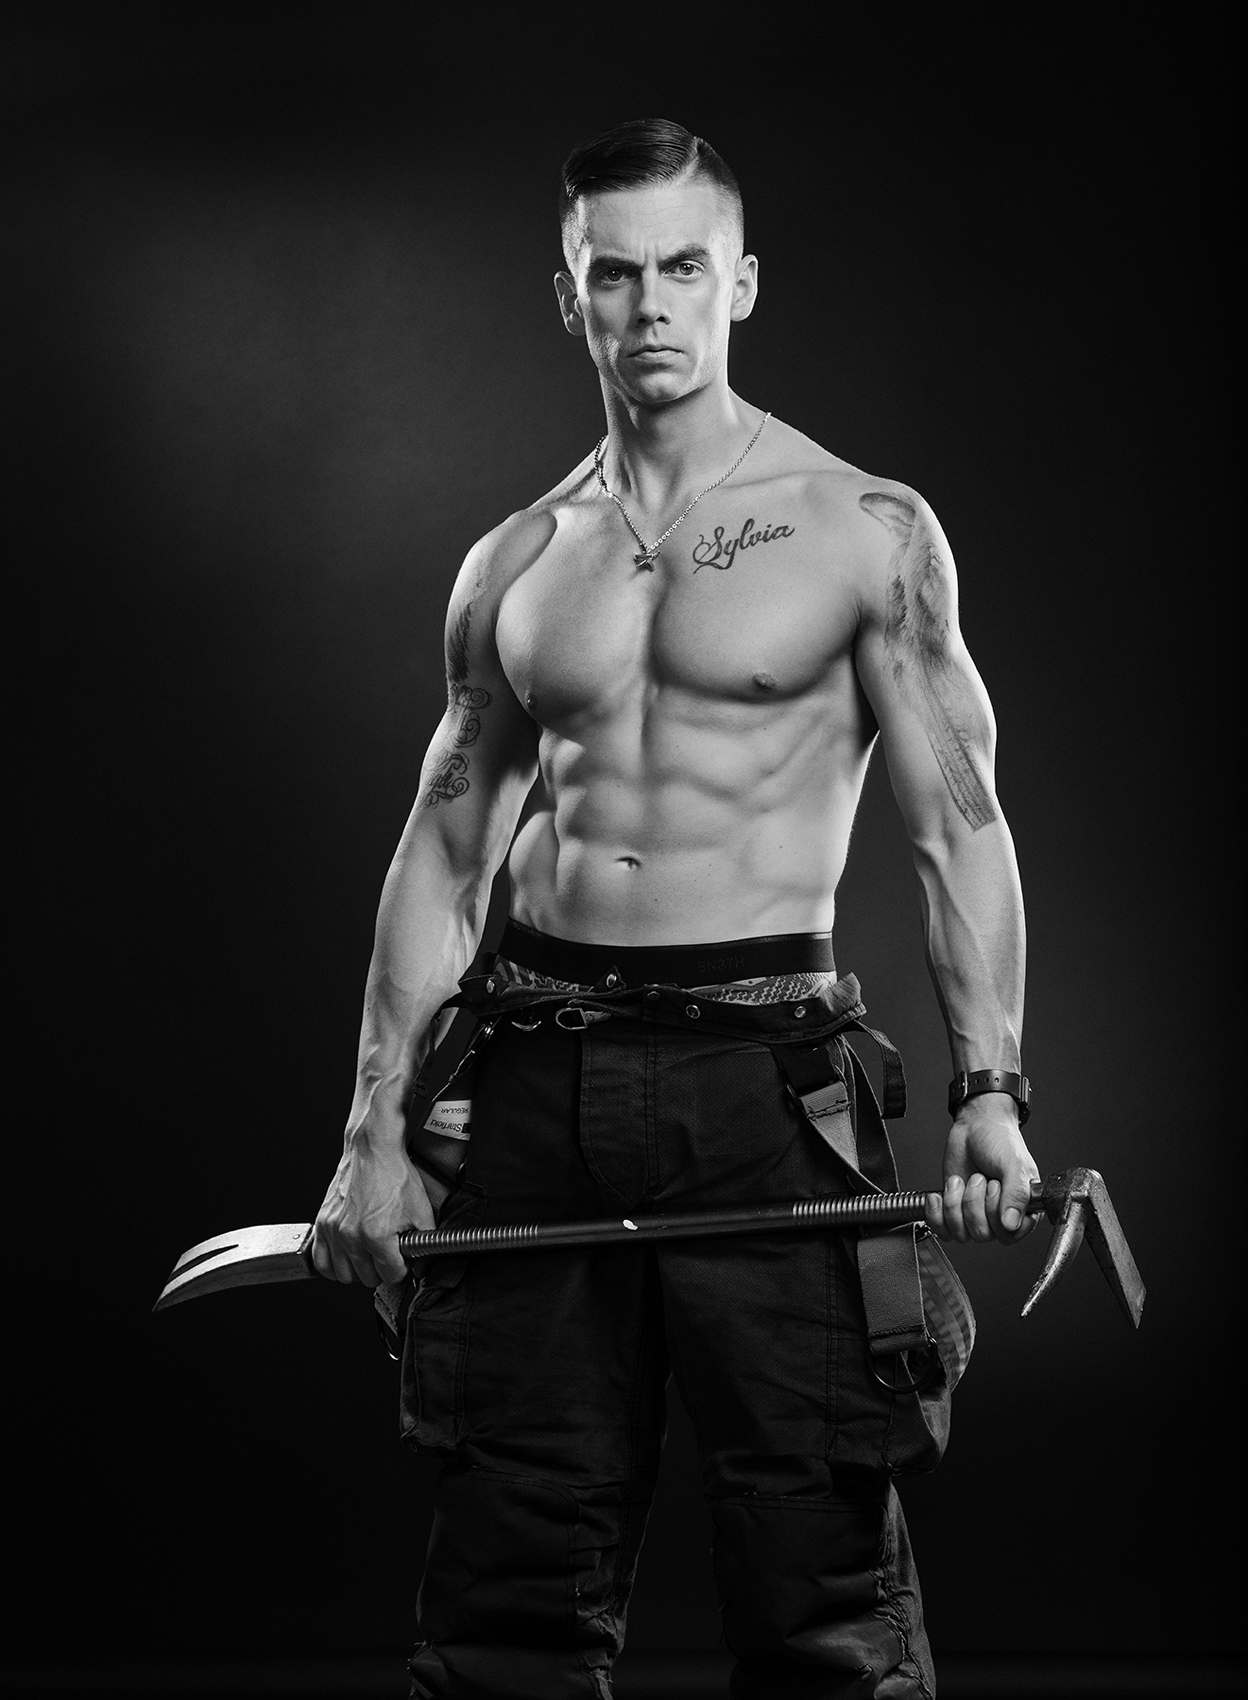 HOF-Hall-of-Flame-Calender-Erich-Saide-Vancouver-Portrait-Photographer-Firefighters-First-Responders-Hot-Hero-October-Brett